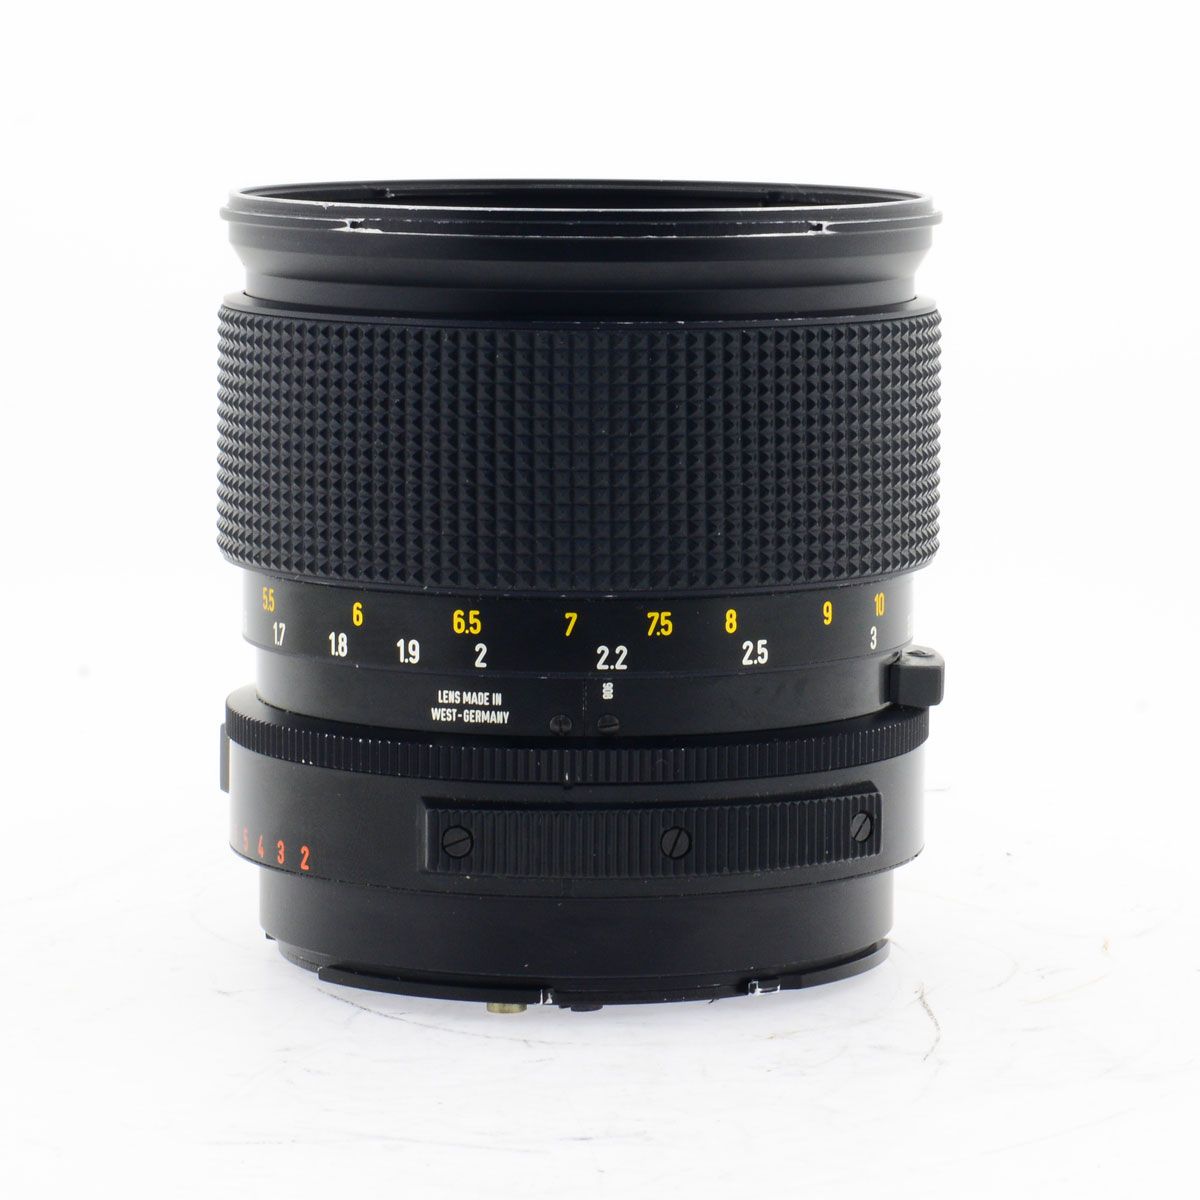 Carl Zeiss Sonnar 150mm f/2.8 T* F Hasselblad V б/у